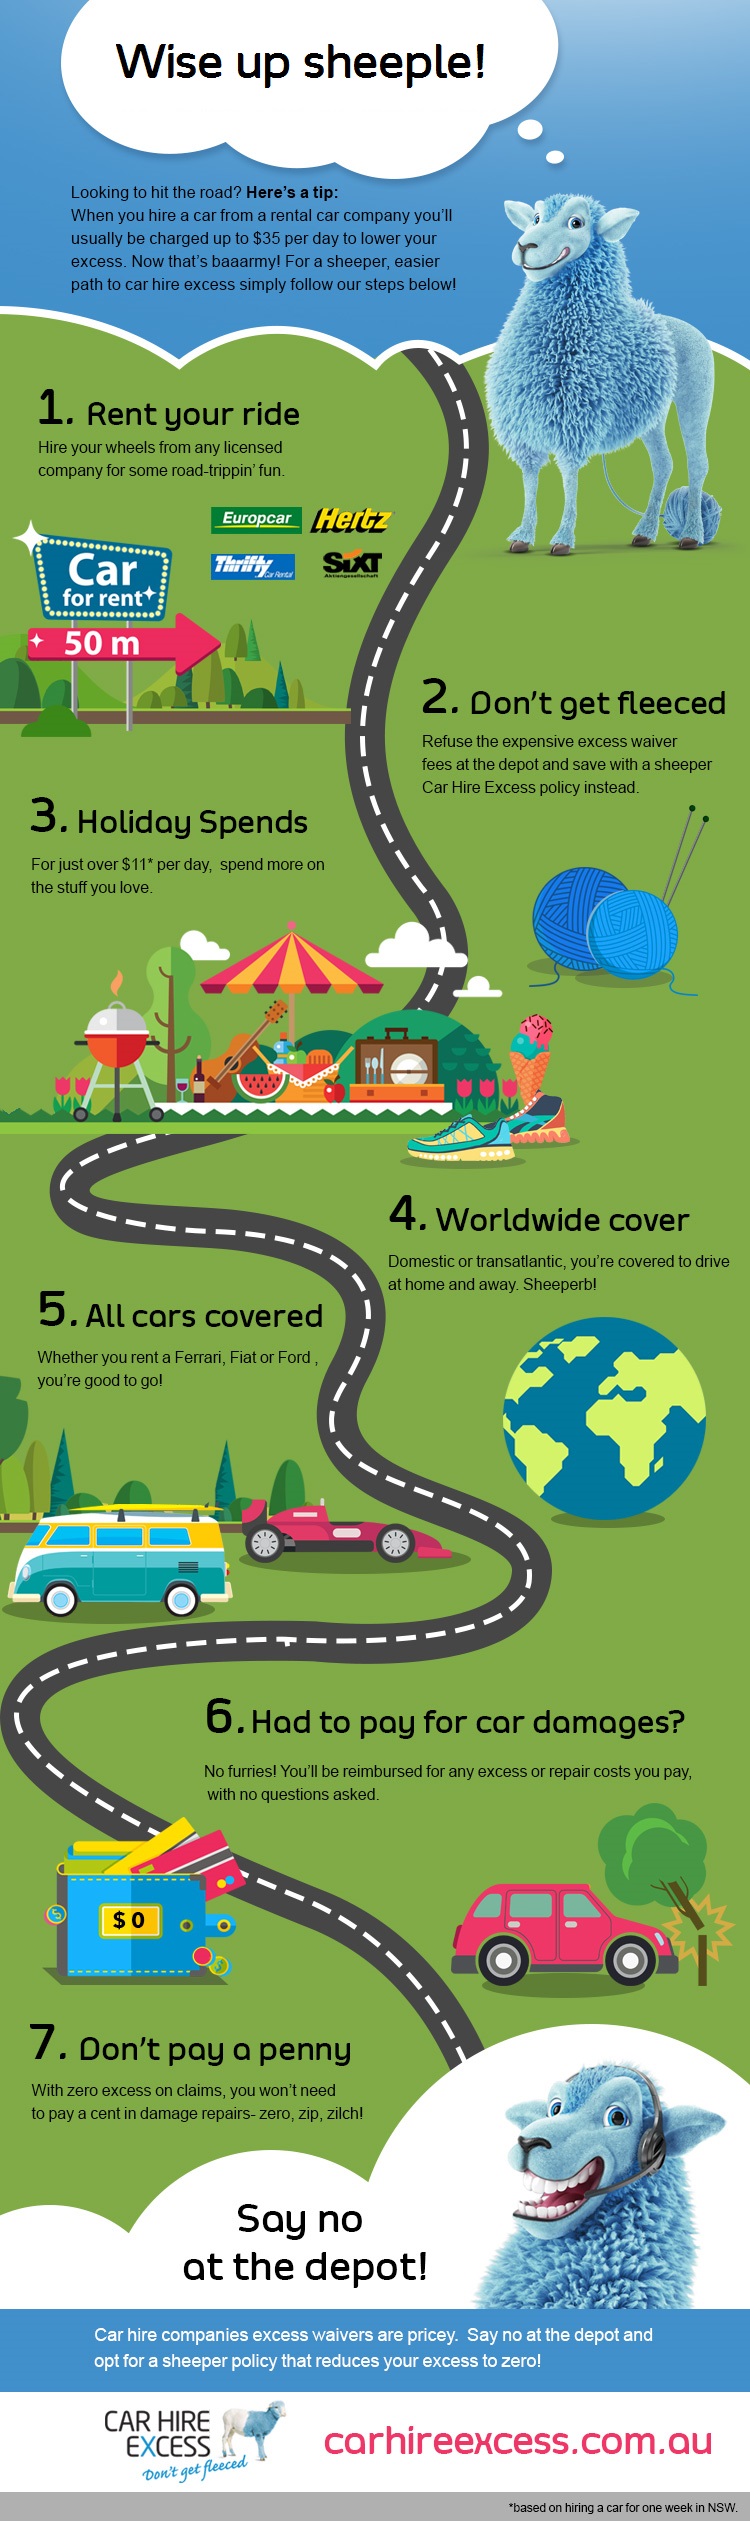 roadmap to car hire excess